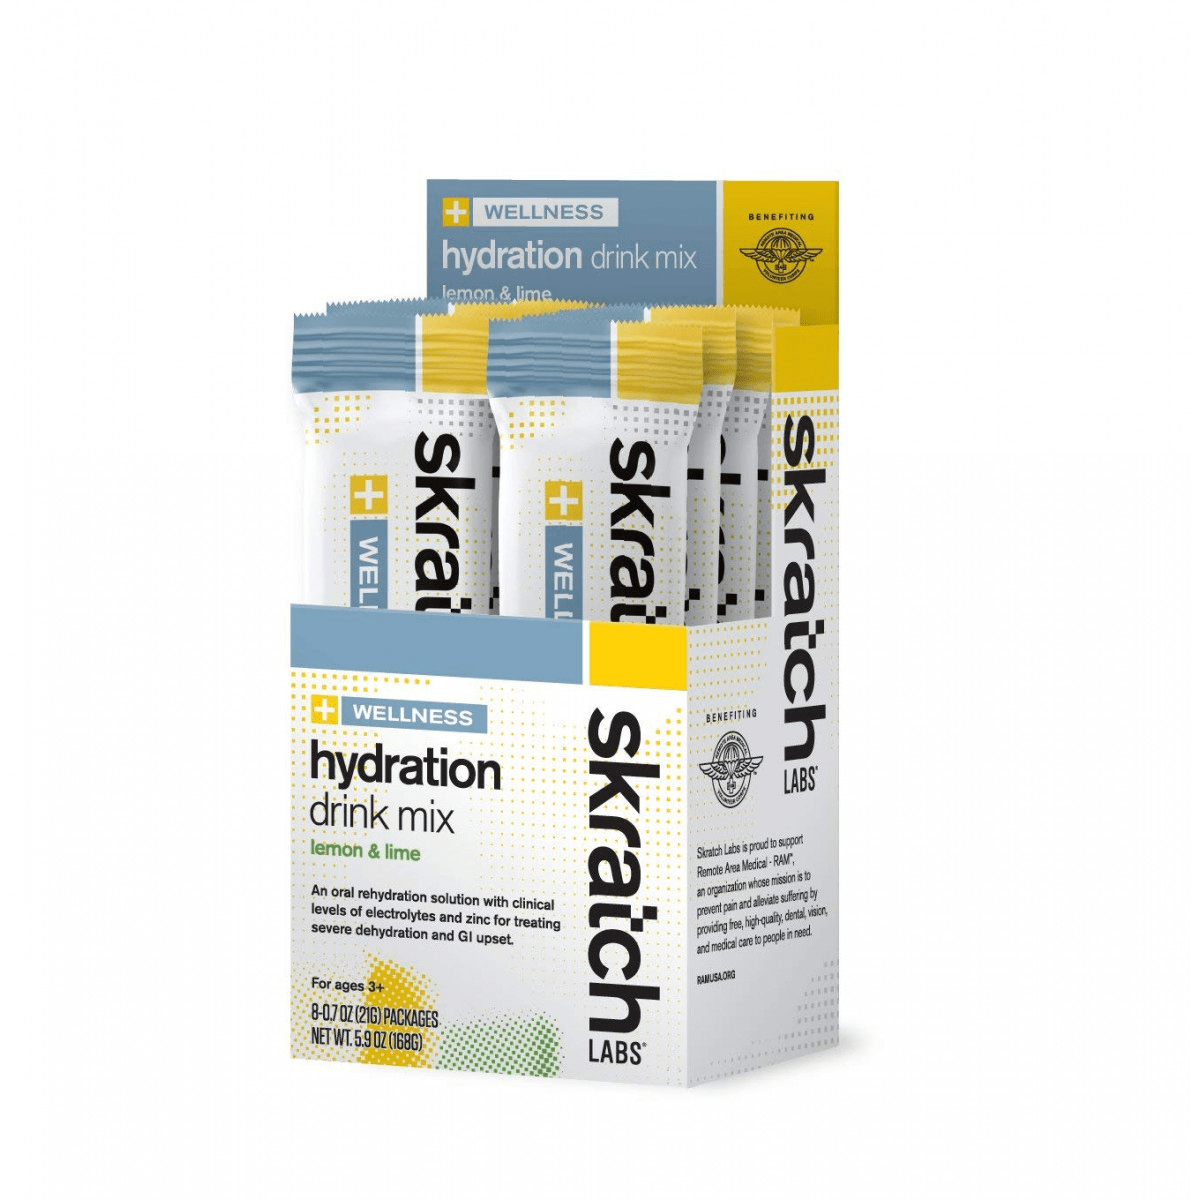 Skratch Labs Wellness Hydration Drink Mix Lemon & Lime 21g Other - Nutrition - Drink Mixes